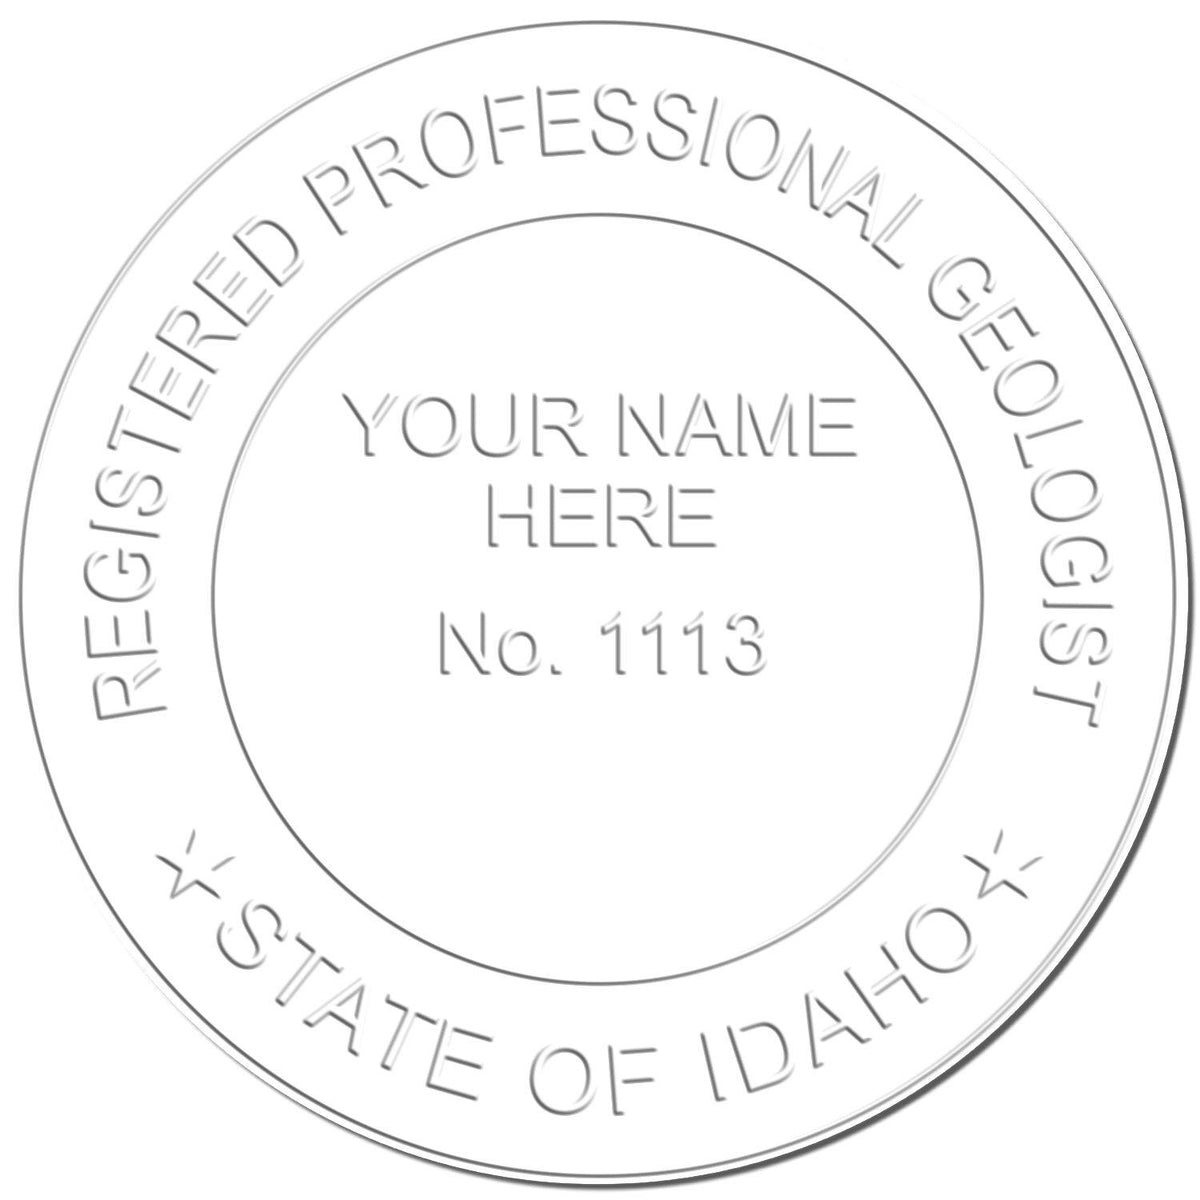 Geologist Gold Gift Seal Embosser - Engineer Seal Stamps - Embosser Type_Desk, Embosser Type_Gift, Type of Use_Professional, validate-product-description